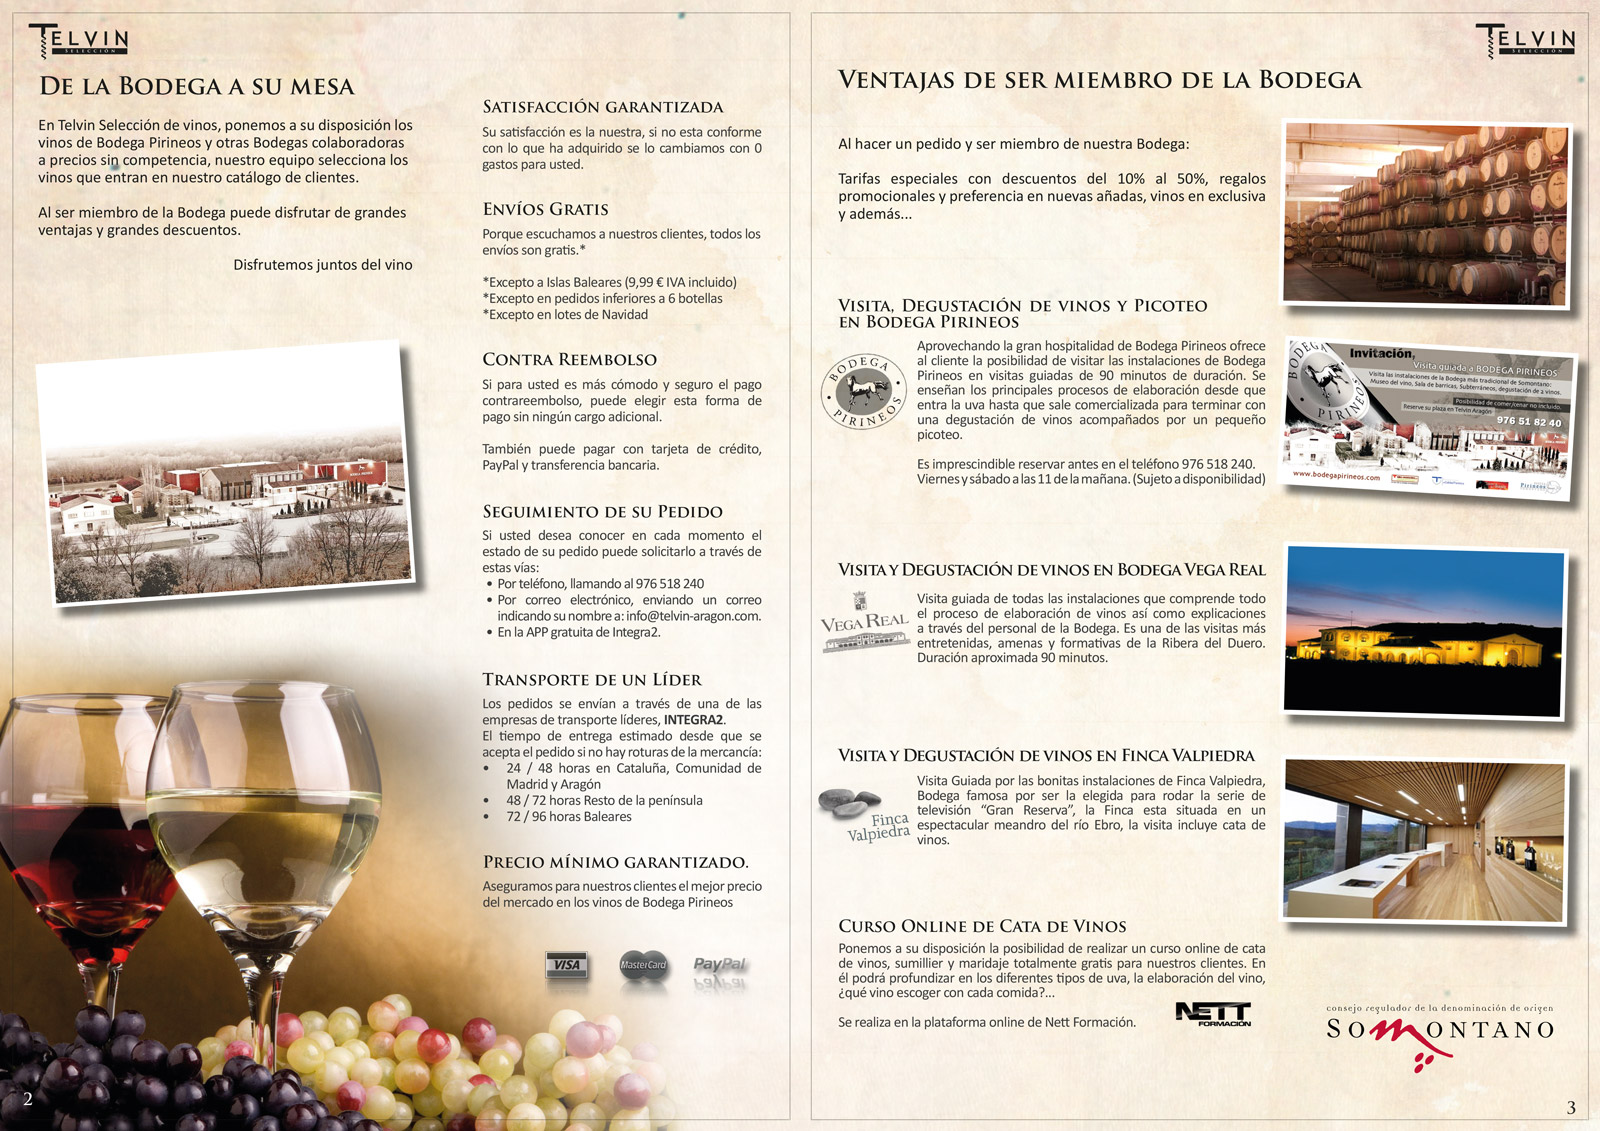 Portfolio of creative layout and design of catalogs and magazines for wineries and food